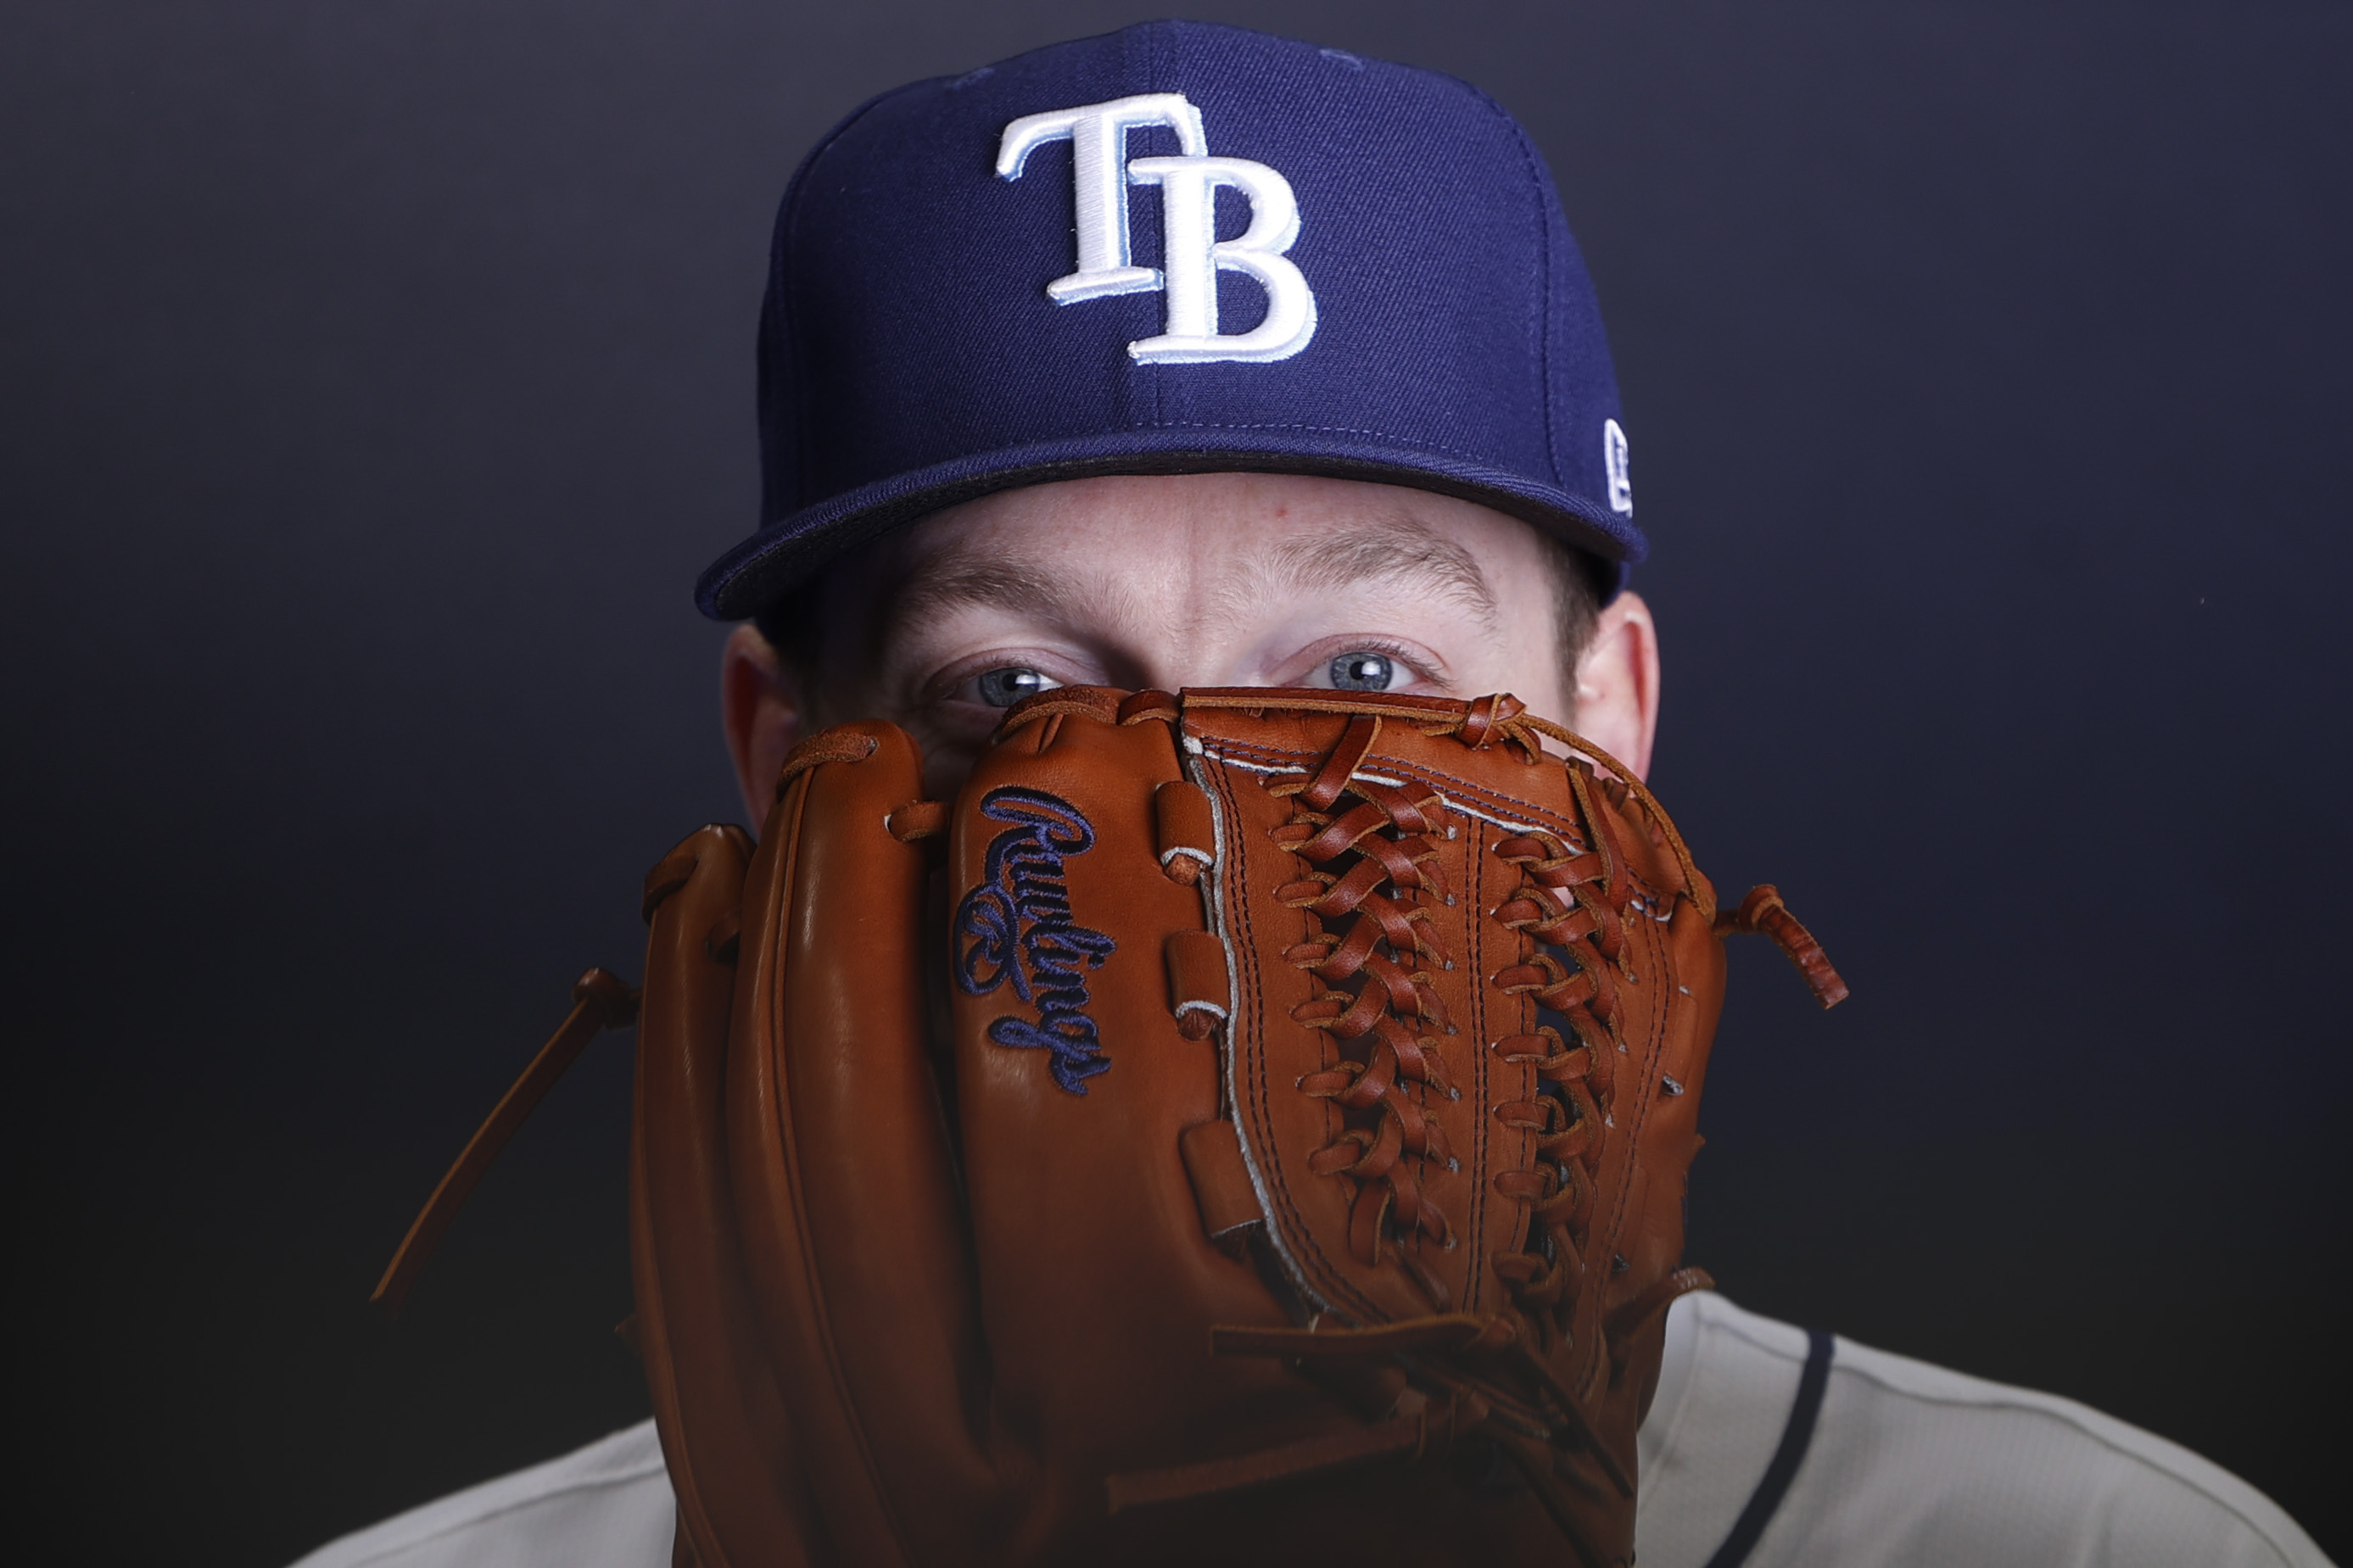 27 revelations about the Rays as they head into their 27th season